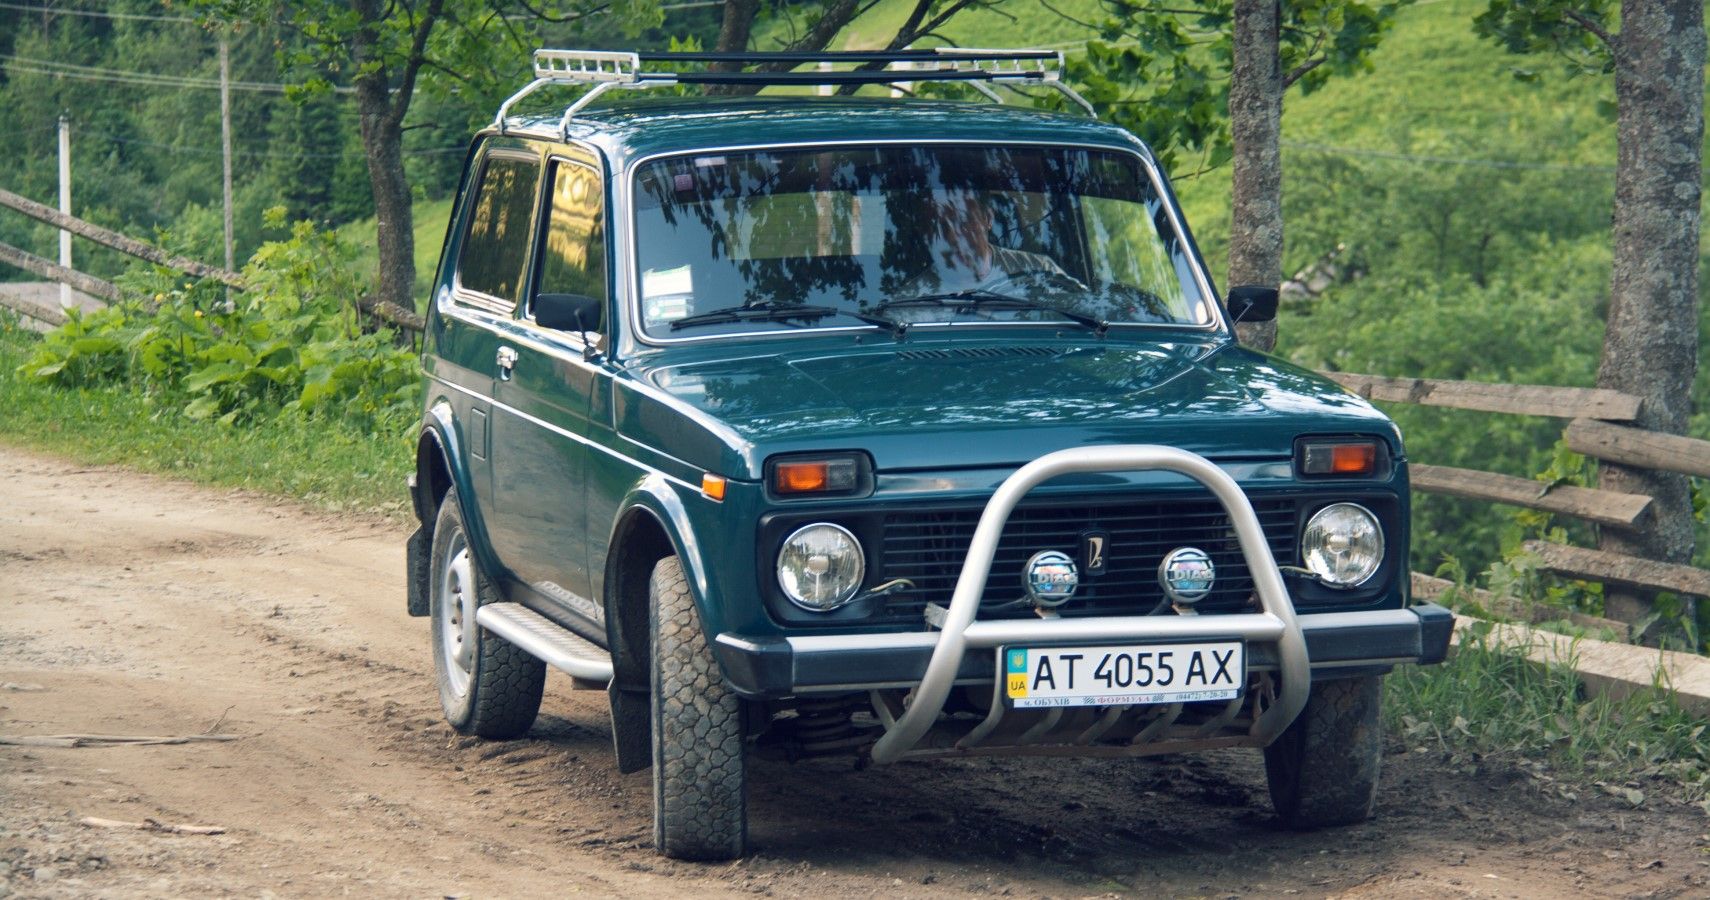 Lada Niva in British green front view with front bull bar